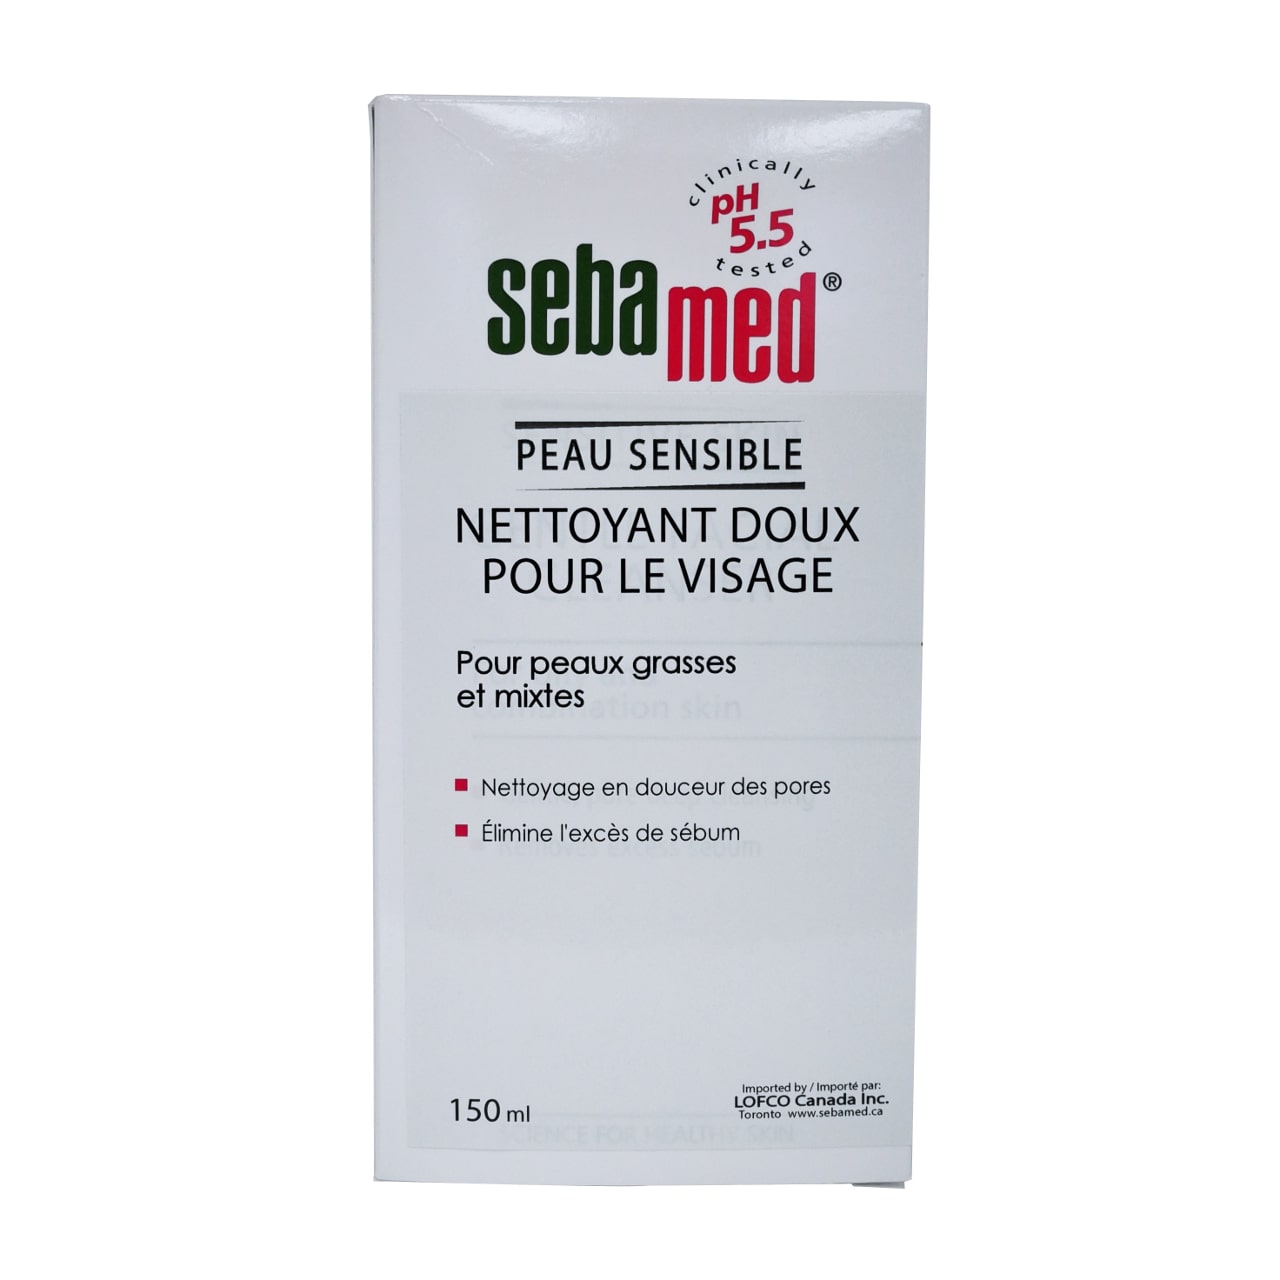 Product label for Sebamed Gentle Facial Cleanser in French